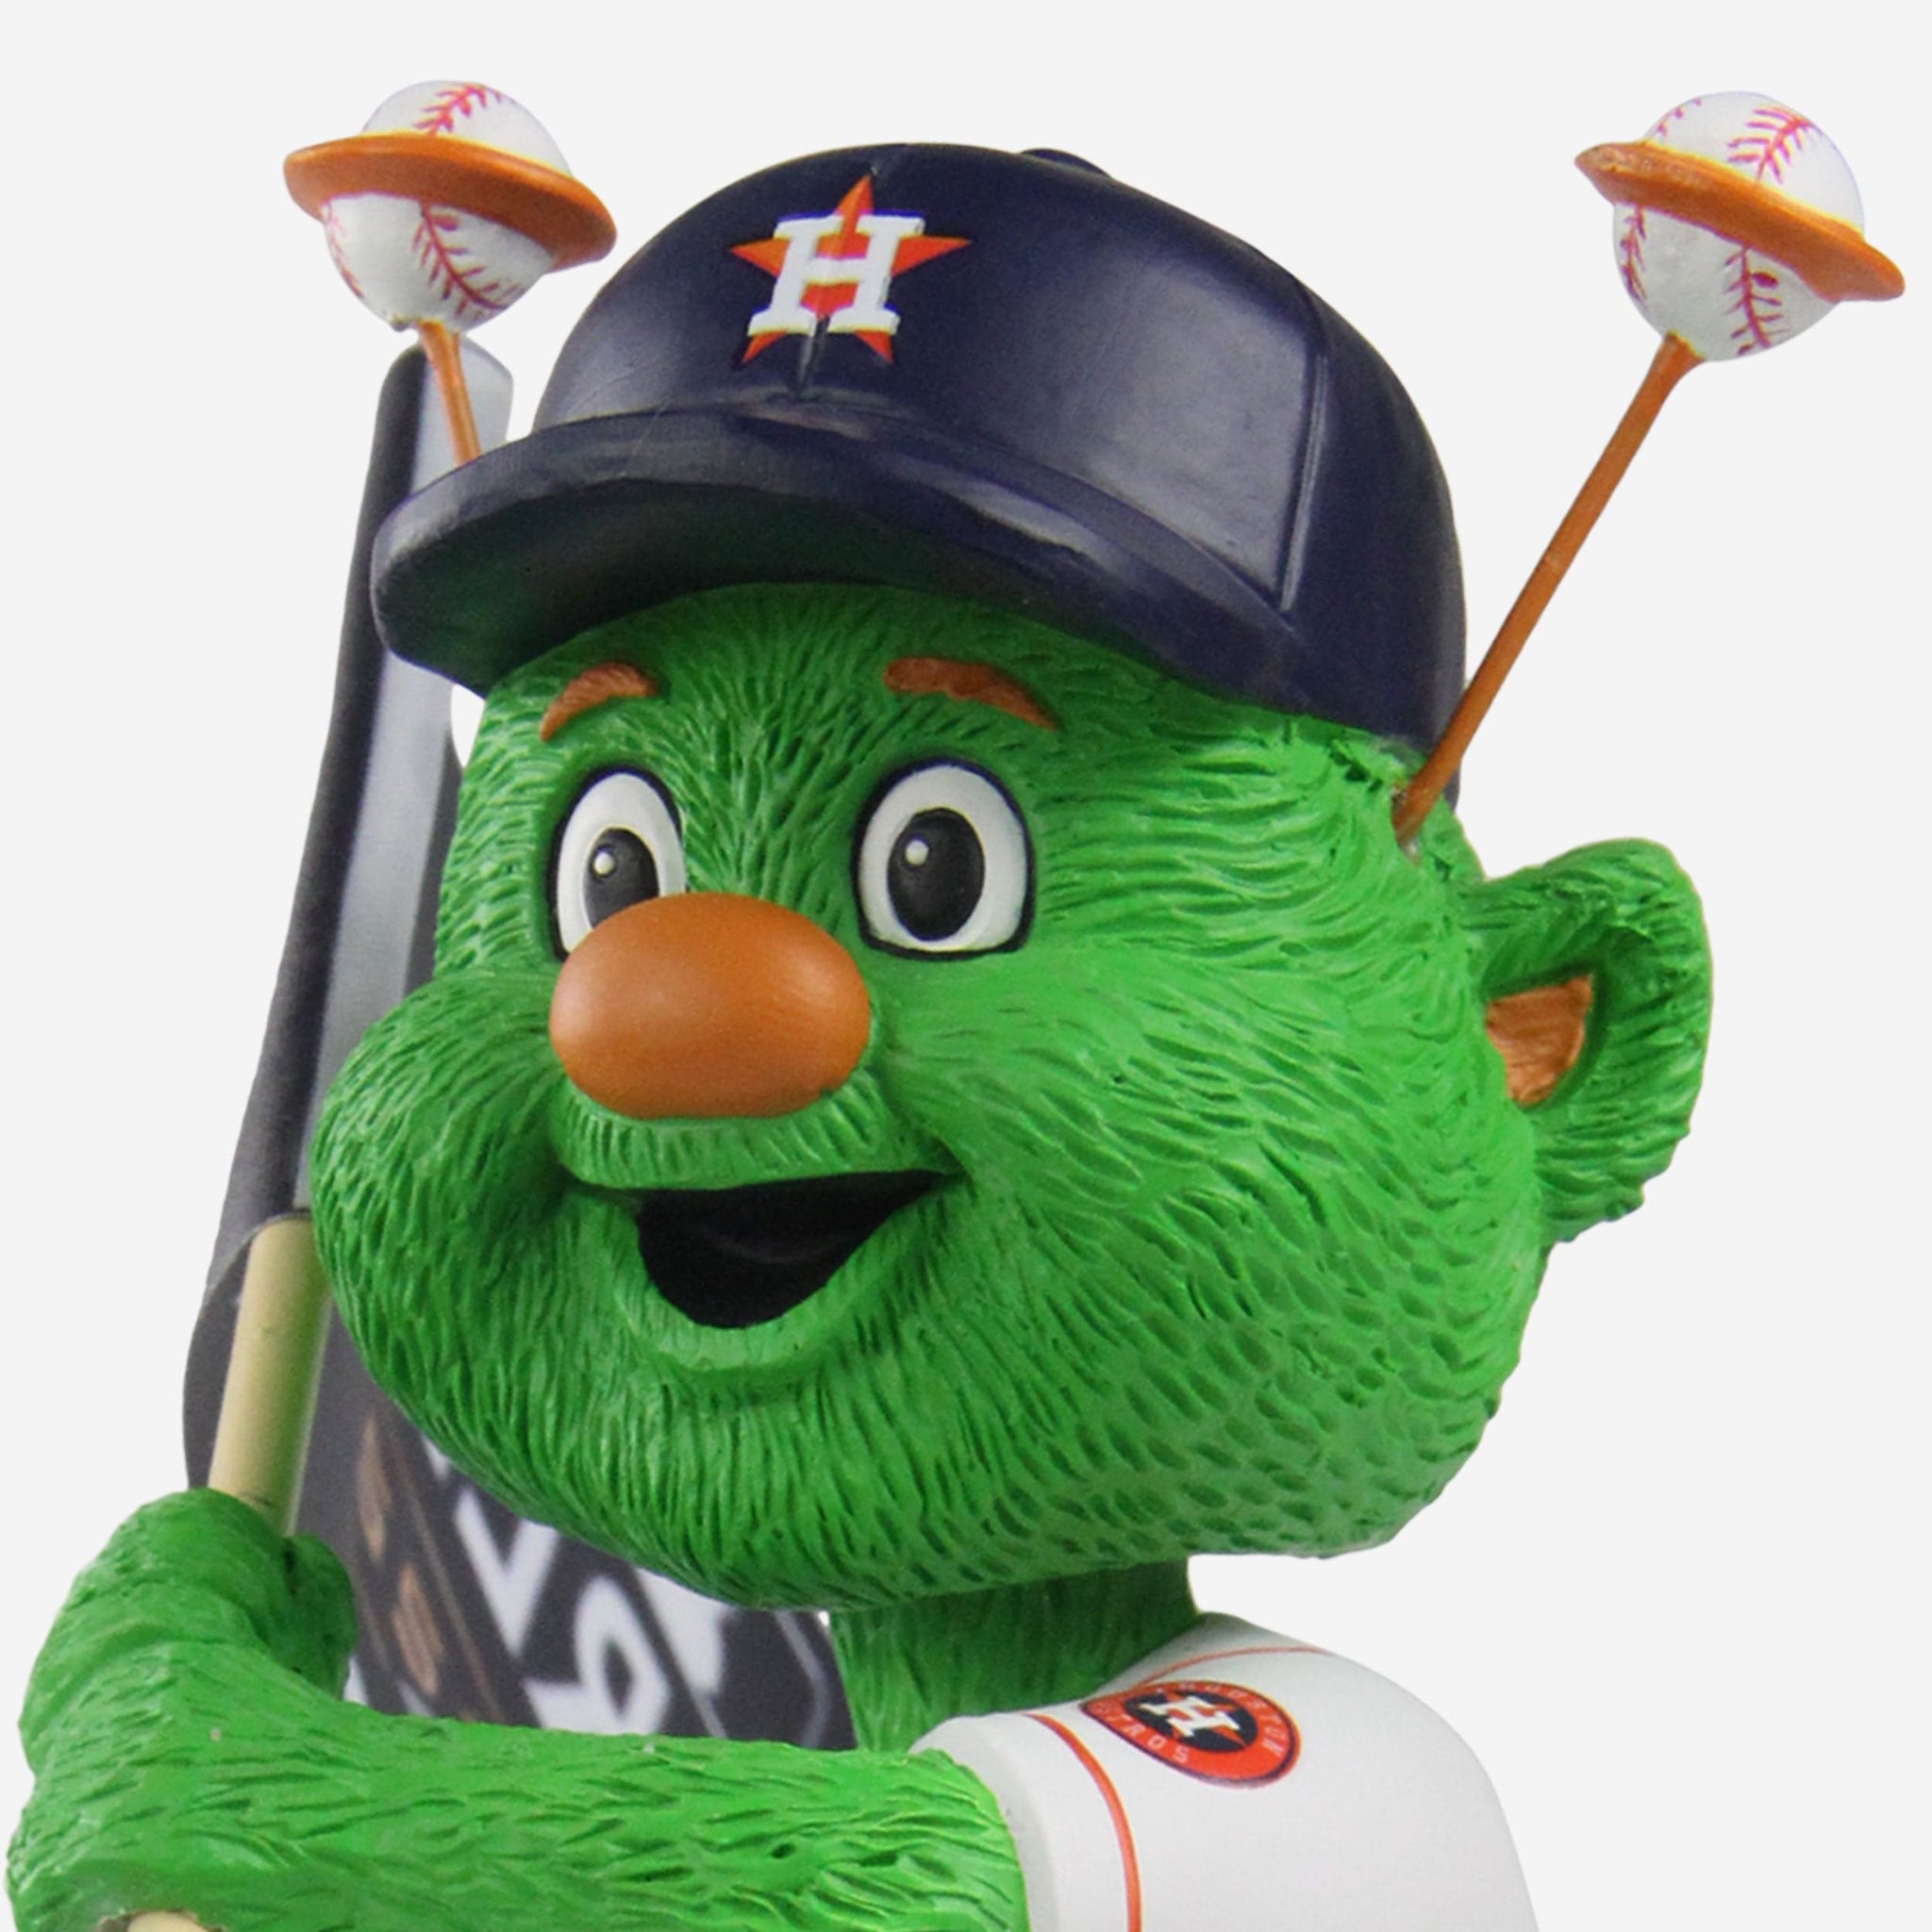 National Mascot Day: Houston Astros' Orbit is No. 7 in MLB